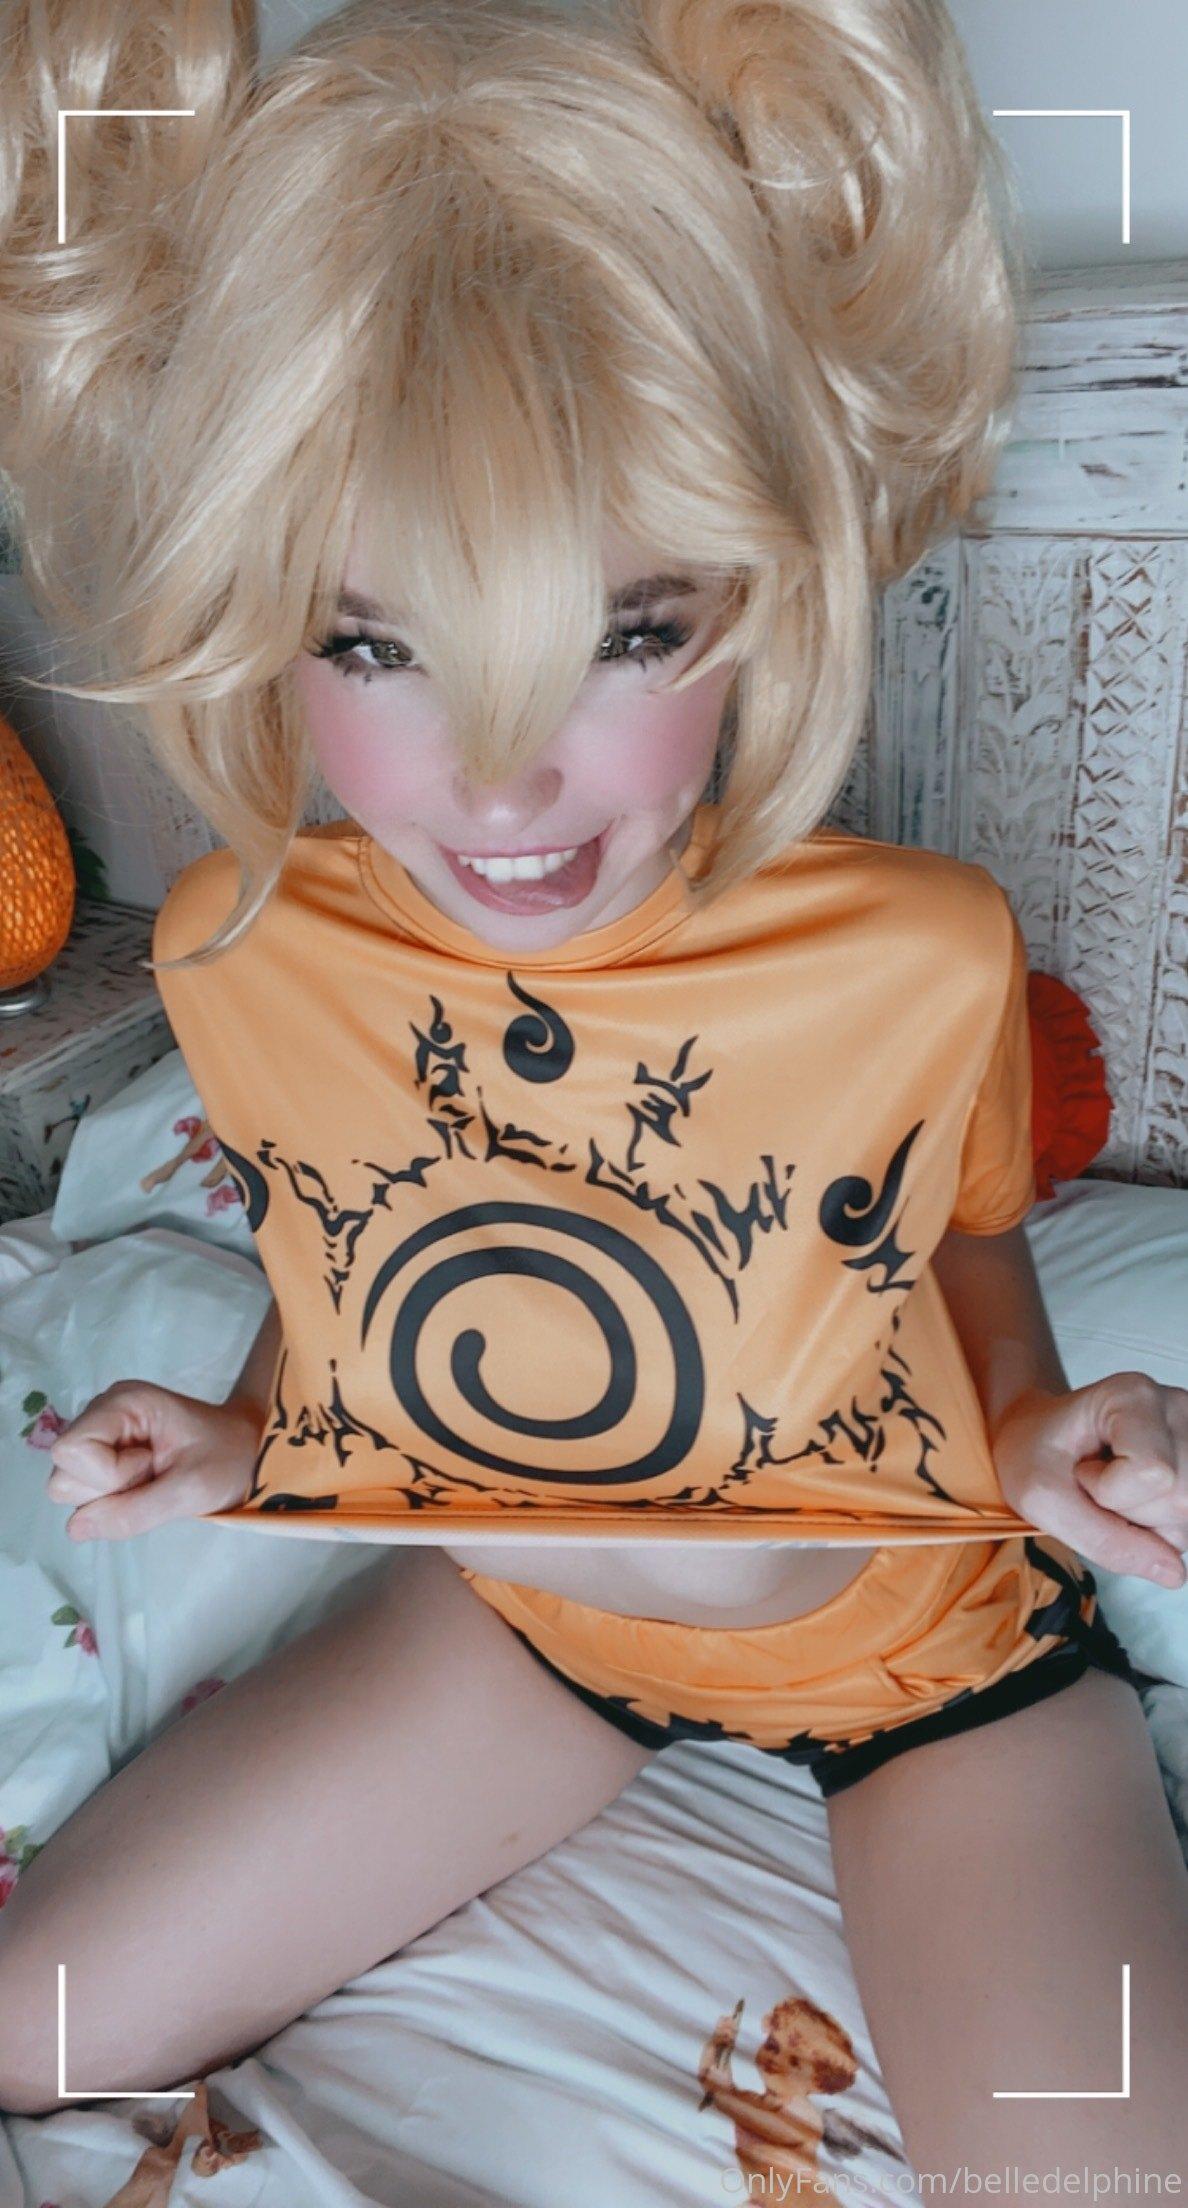 belle delphine nude naruto girl onlyfans set leaked CQRLOX